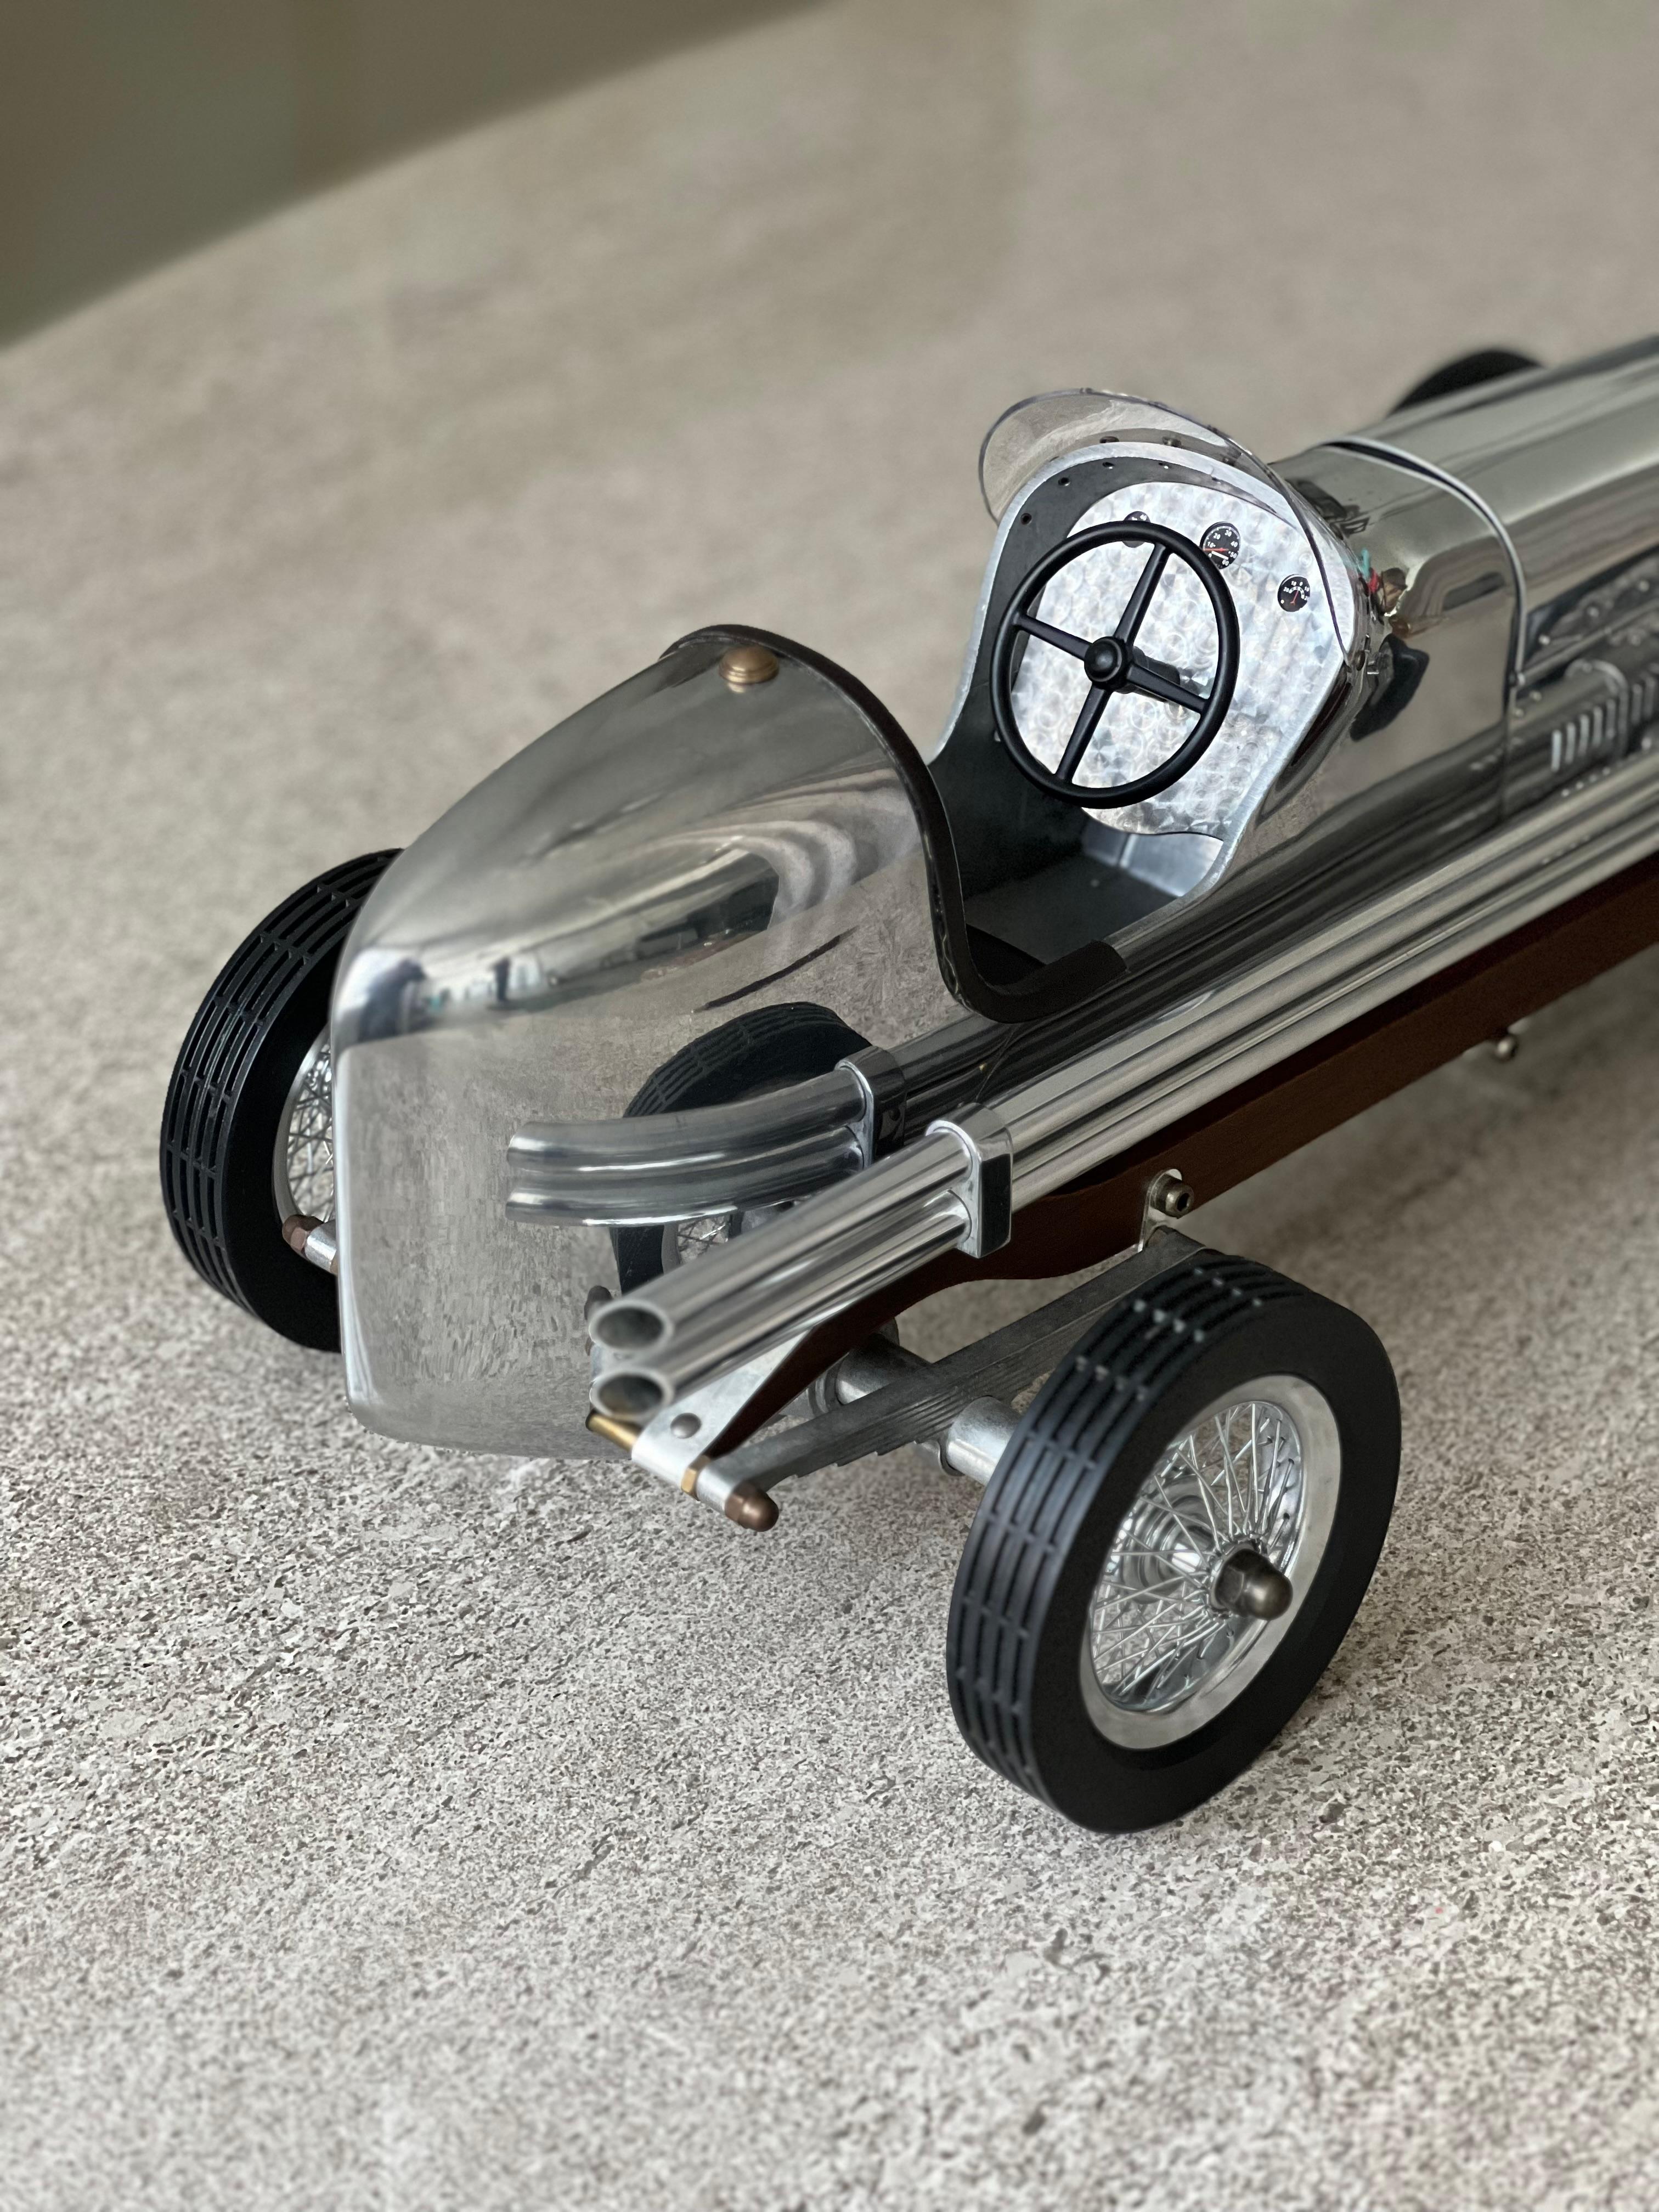 Contemporary 1930s Art Deco Race Car Metal Model, Highly Detailed, Collectible Decorative  For Sale